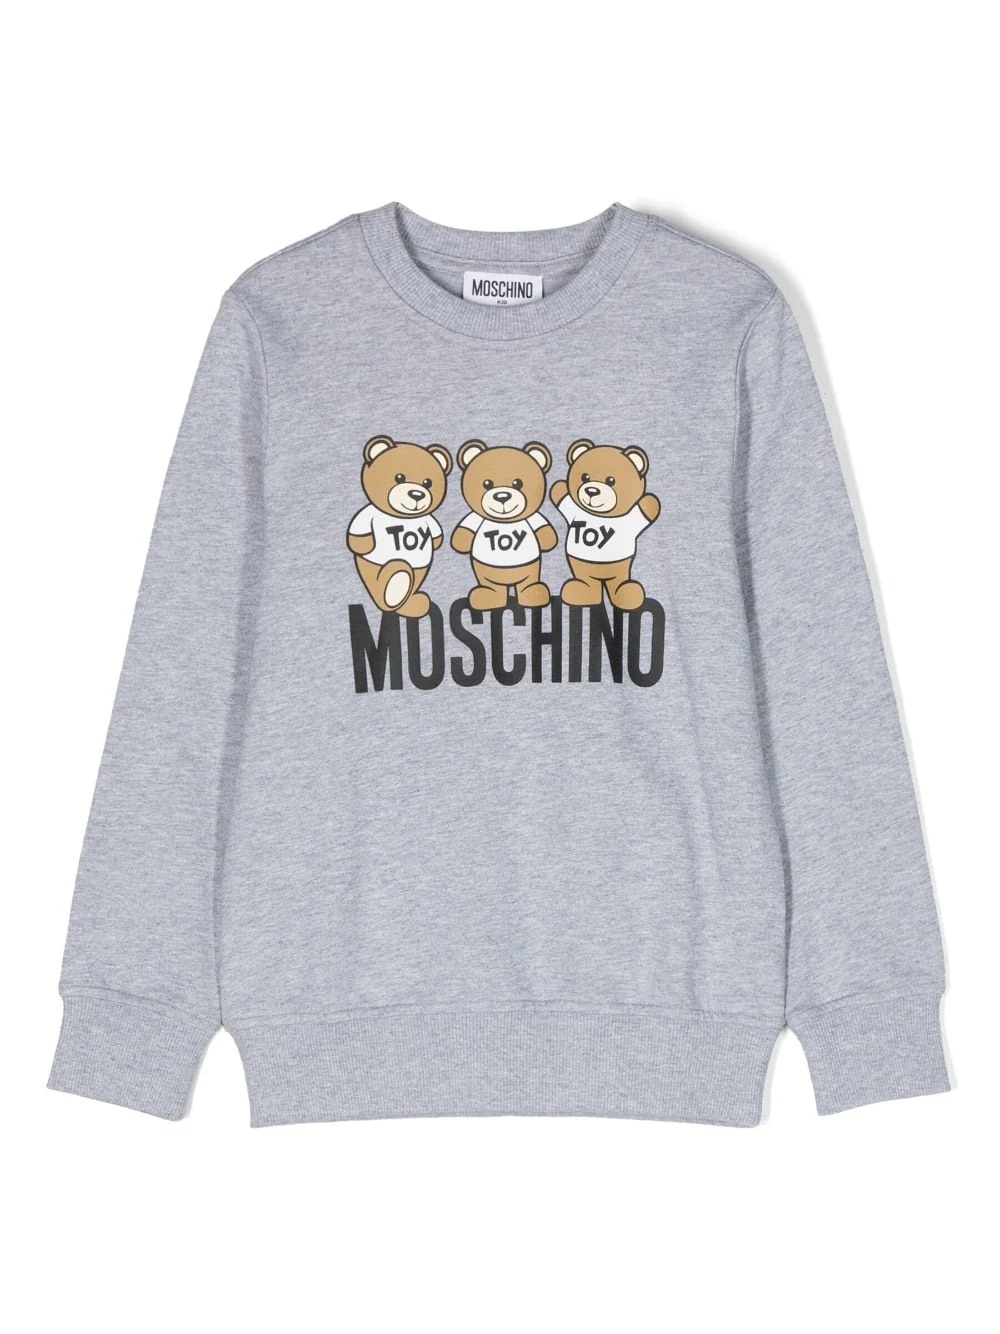 Featured image for “Moschino Felpa Unisex”